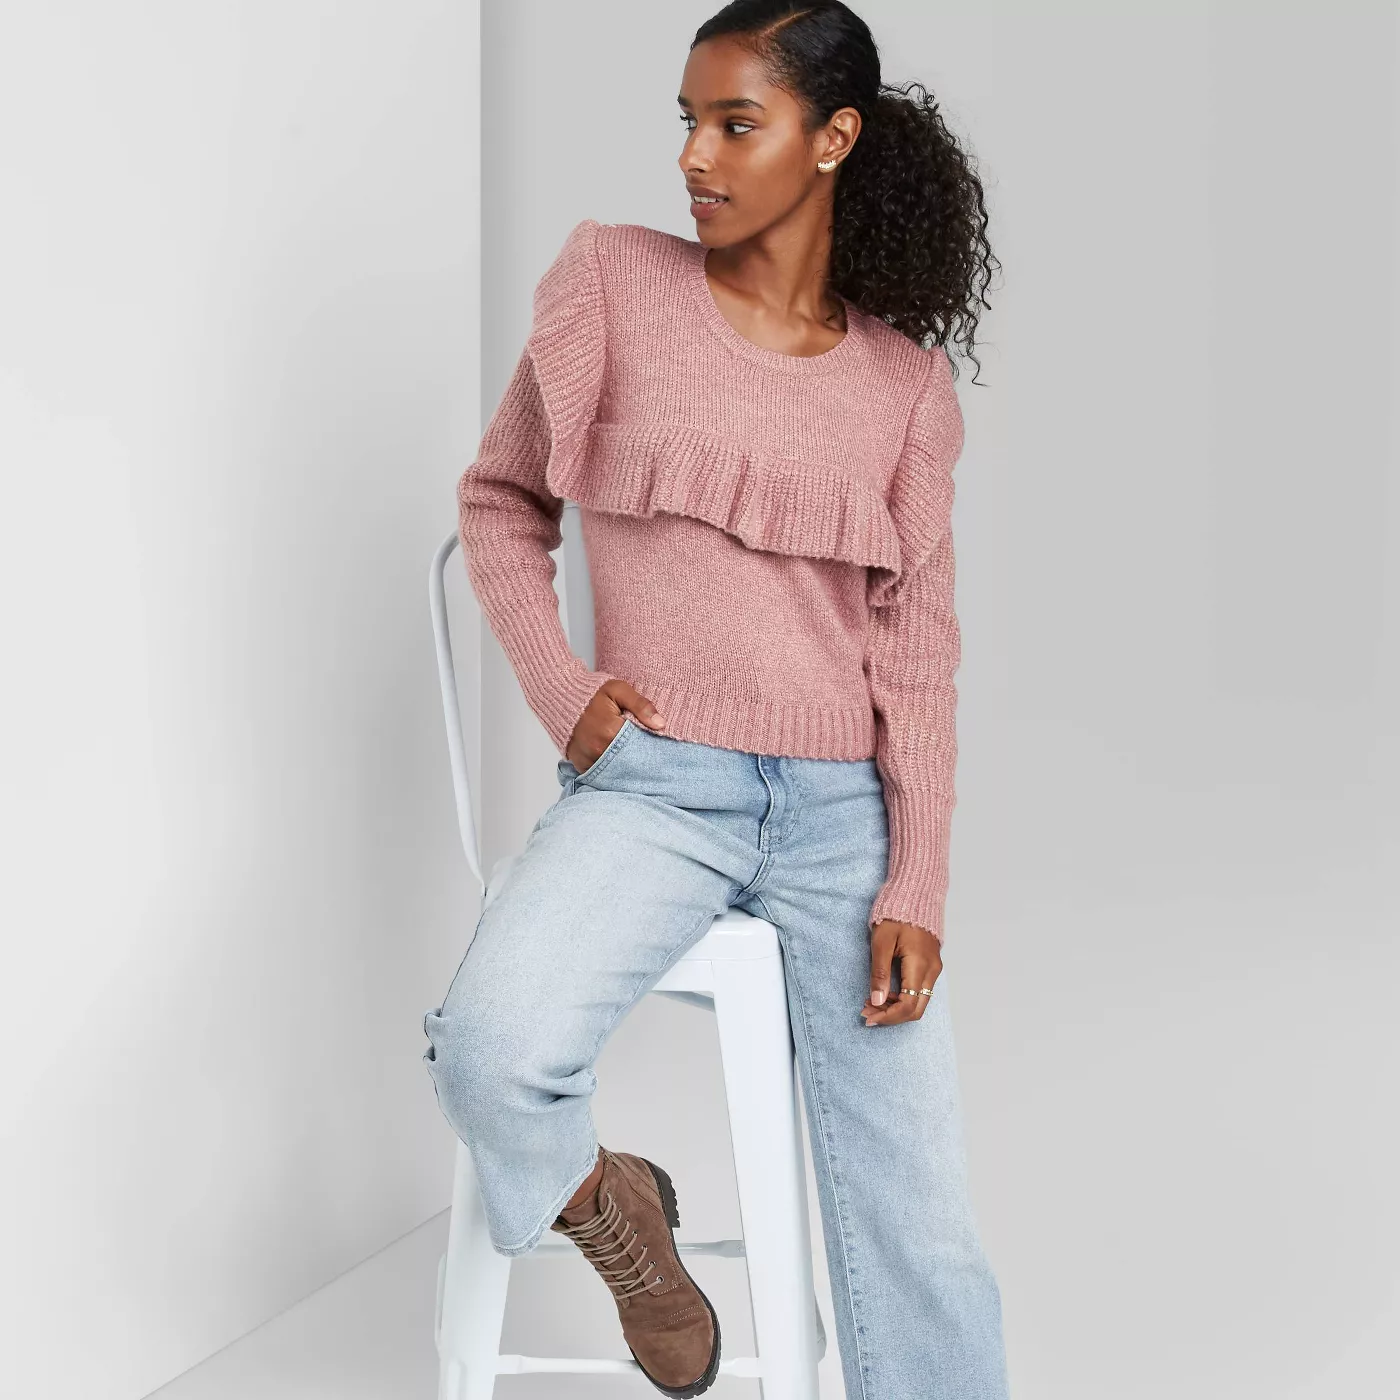 Women's Crewneck Ruffle Pullover Sweater - Wild Fable™ - image 1 of 8